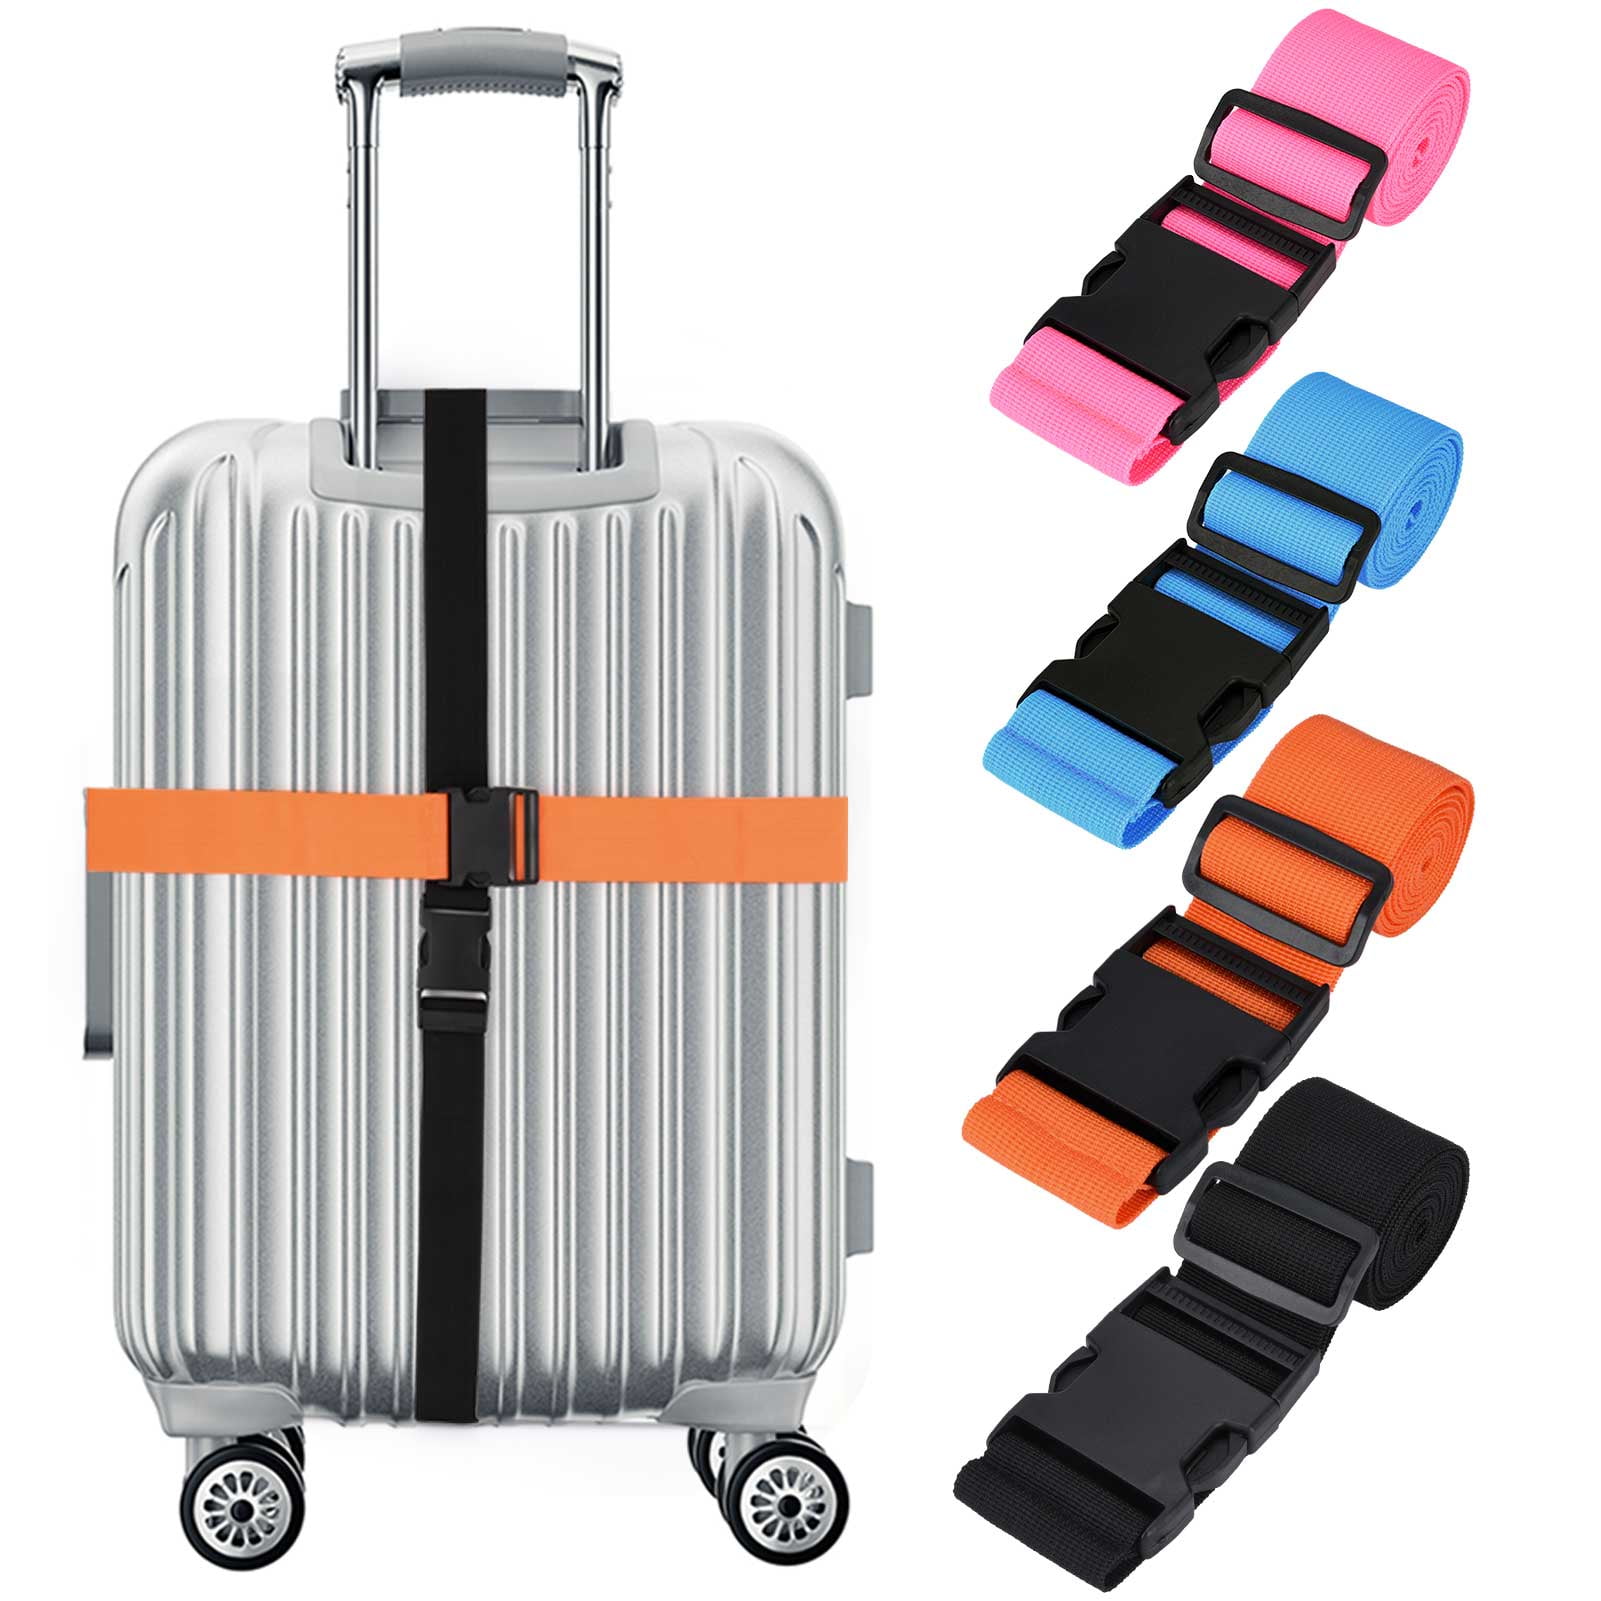  4 Pack Luggage Straps, Adjustable Suitcase Belts, Heavy Duty  Non-Slip Travel Luggage Straps, TSA Approved with Quick-Release Buckle Travel  Accessories Bag Straps（Rainbow） : Clothing, Shoes & Jewelry